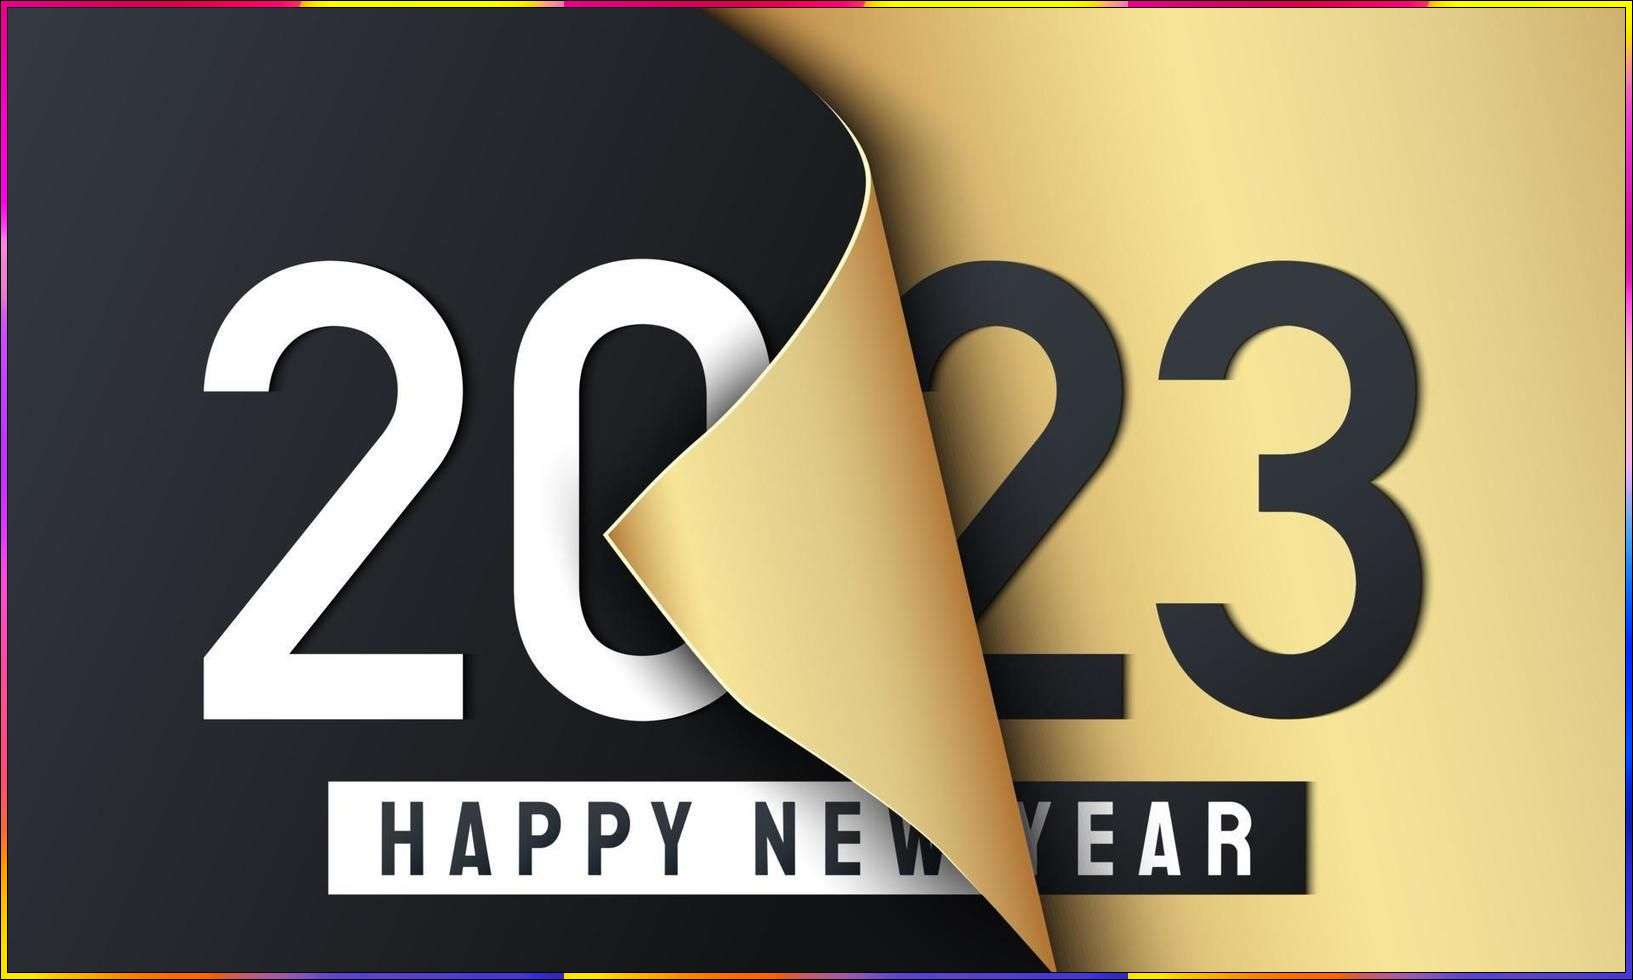 happy new year 2023 photo download
